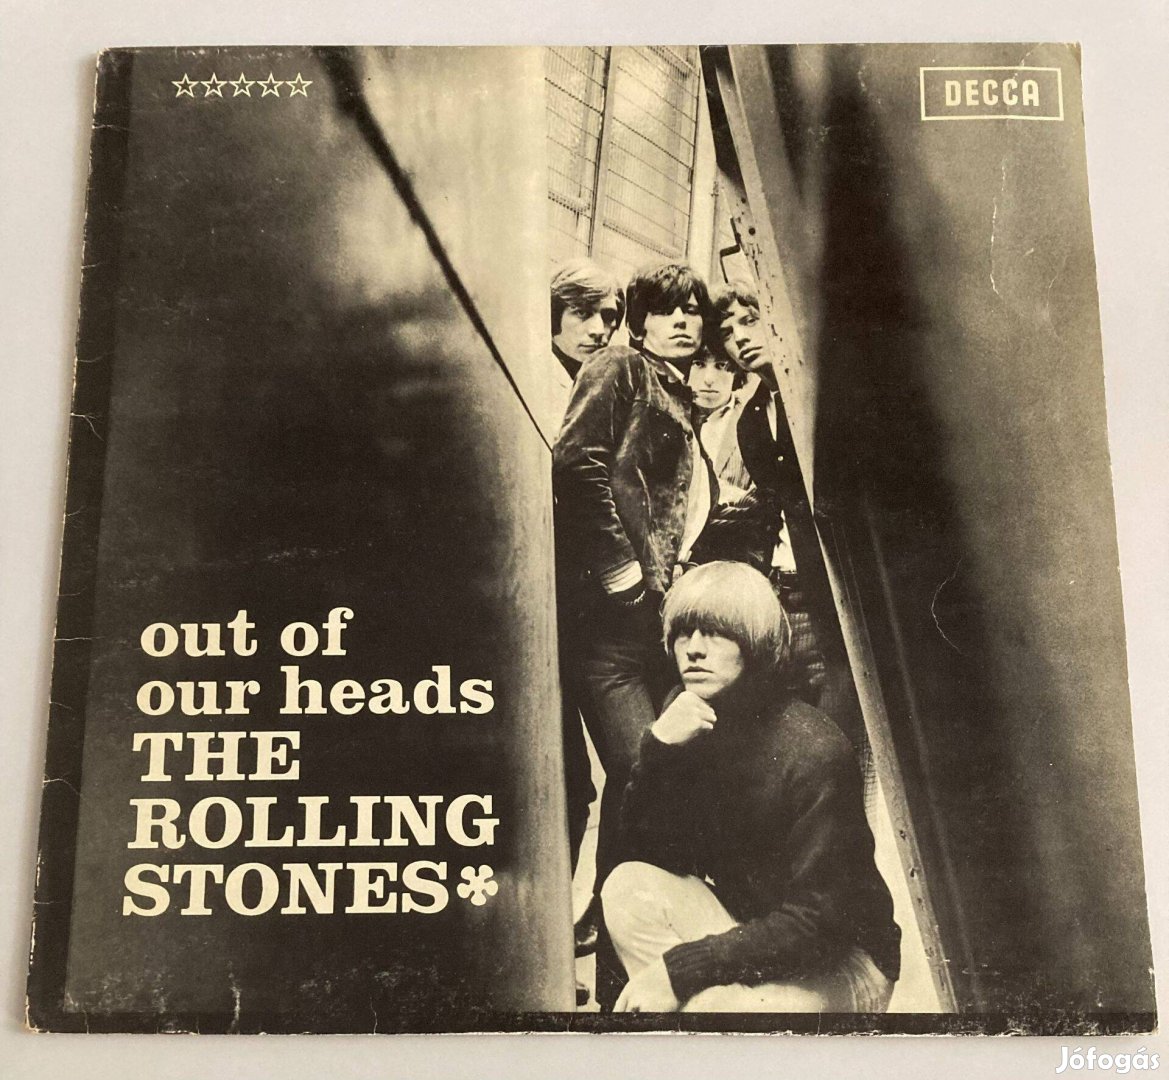 Rolling Stones - Out of Our Heads (német)